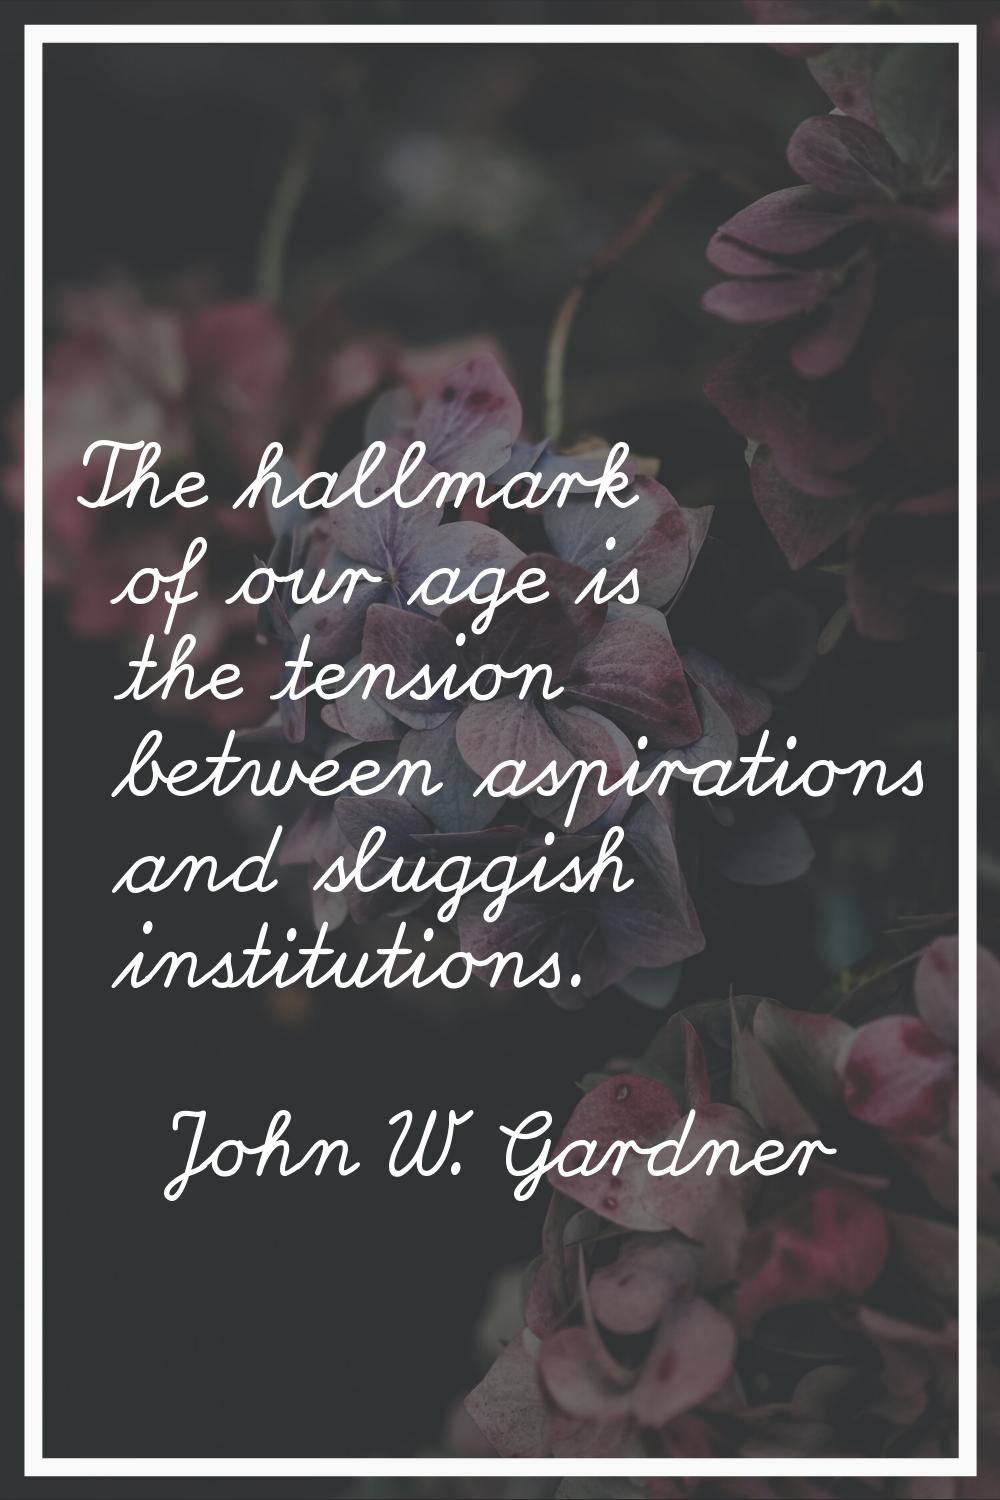 The hallmark of our age is the tension between aspirations and sluggish institutions.